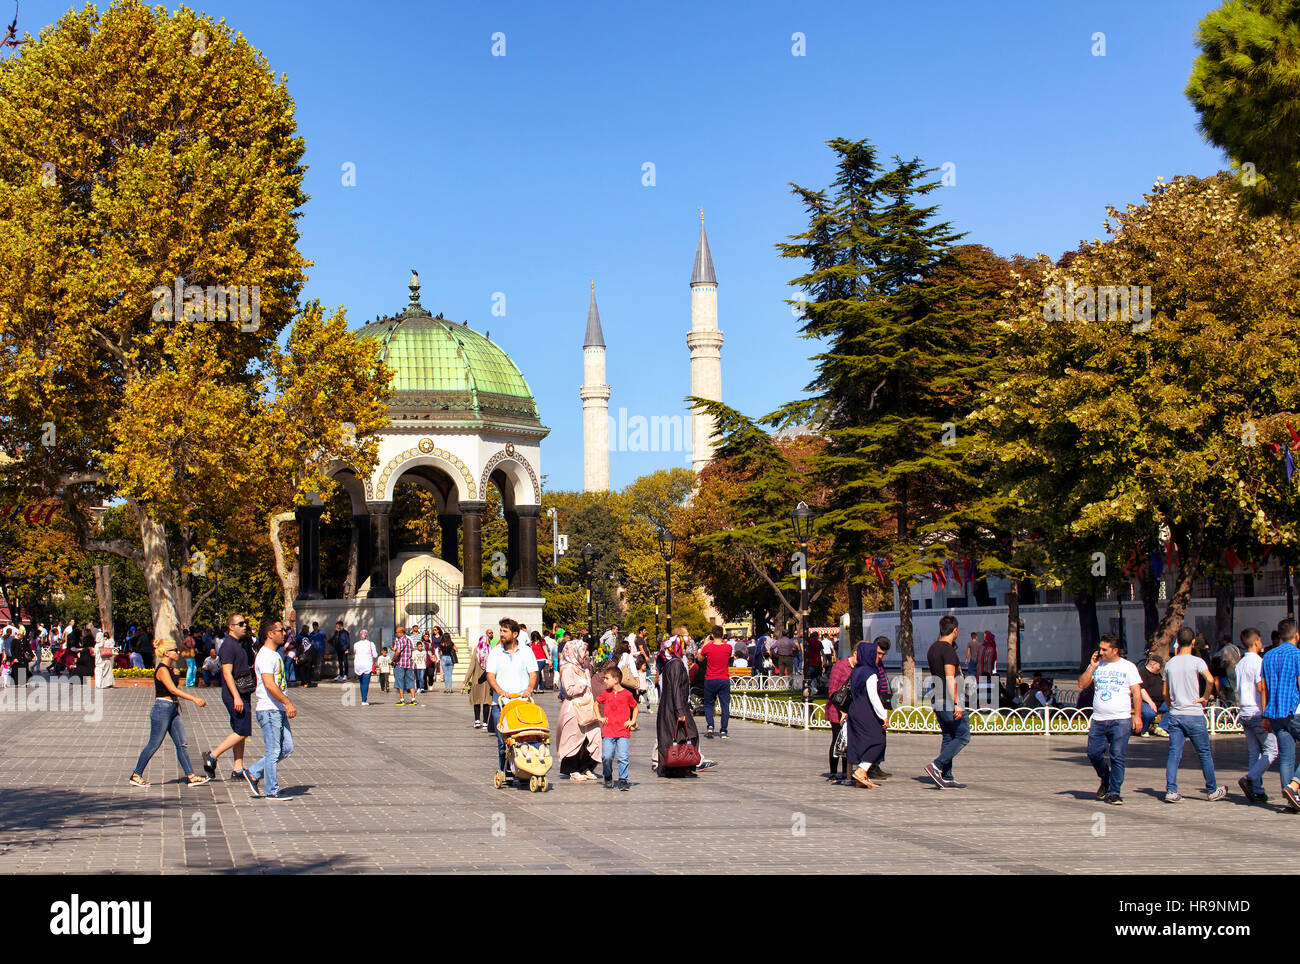 Local people and tourists walk around Sultanahmet area neat Blue Mosque in Istasnbul. German fountain and minarets of Blue Mosque are in the backgroun Stock Photo